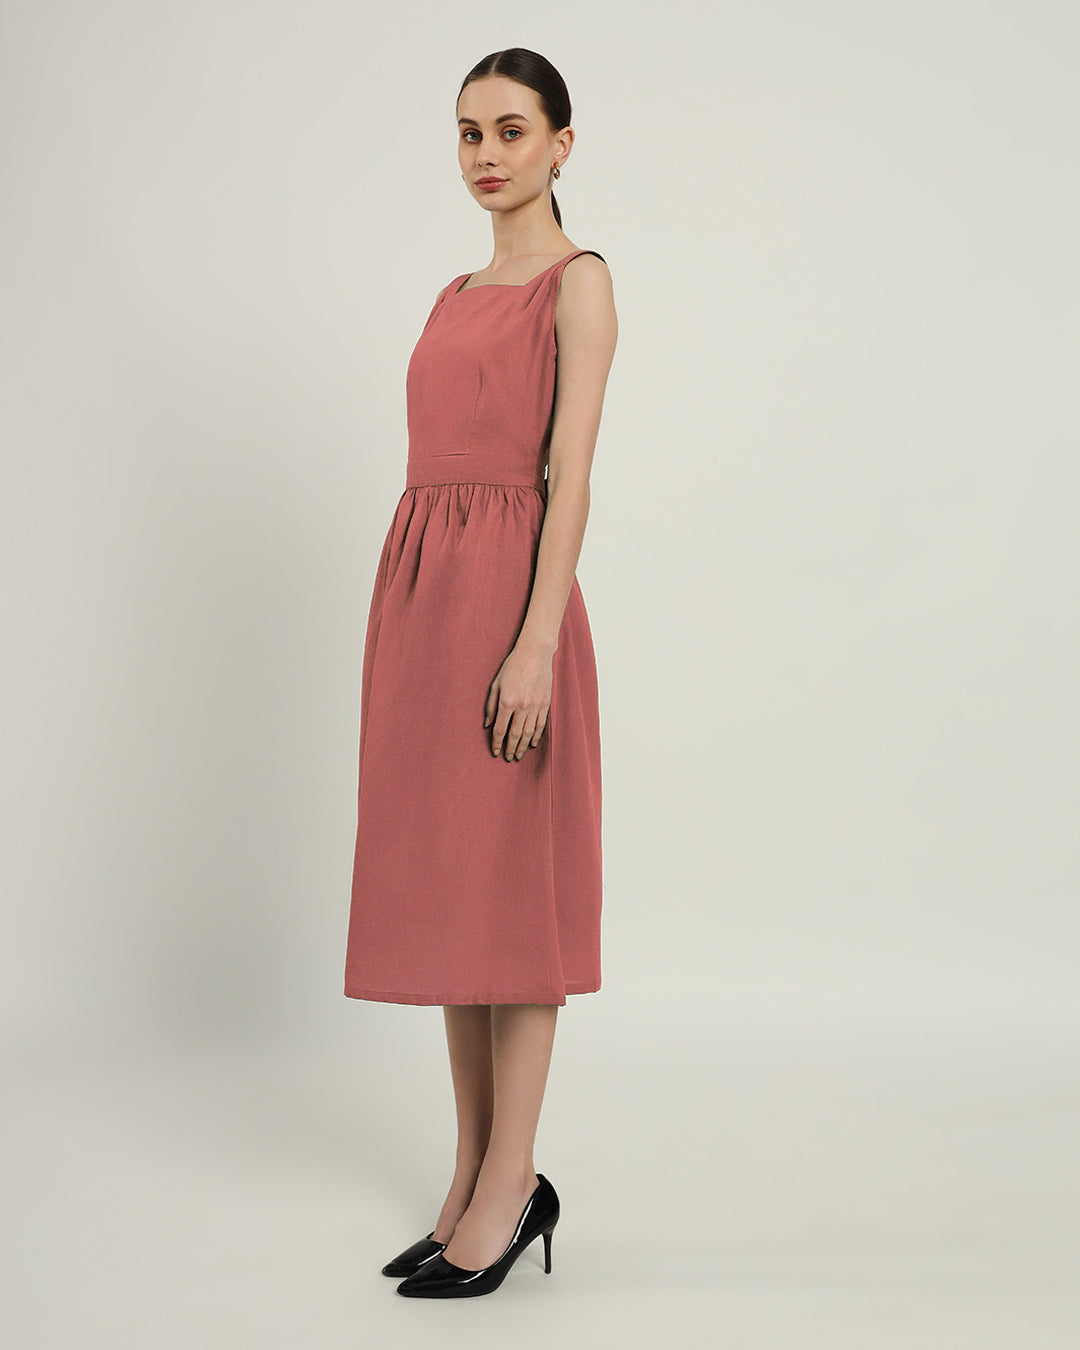 The Mihara Ivory Pink Cotton Dress